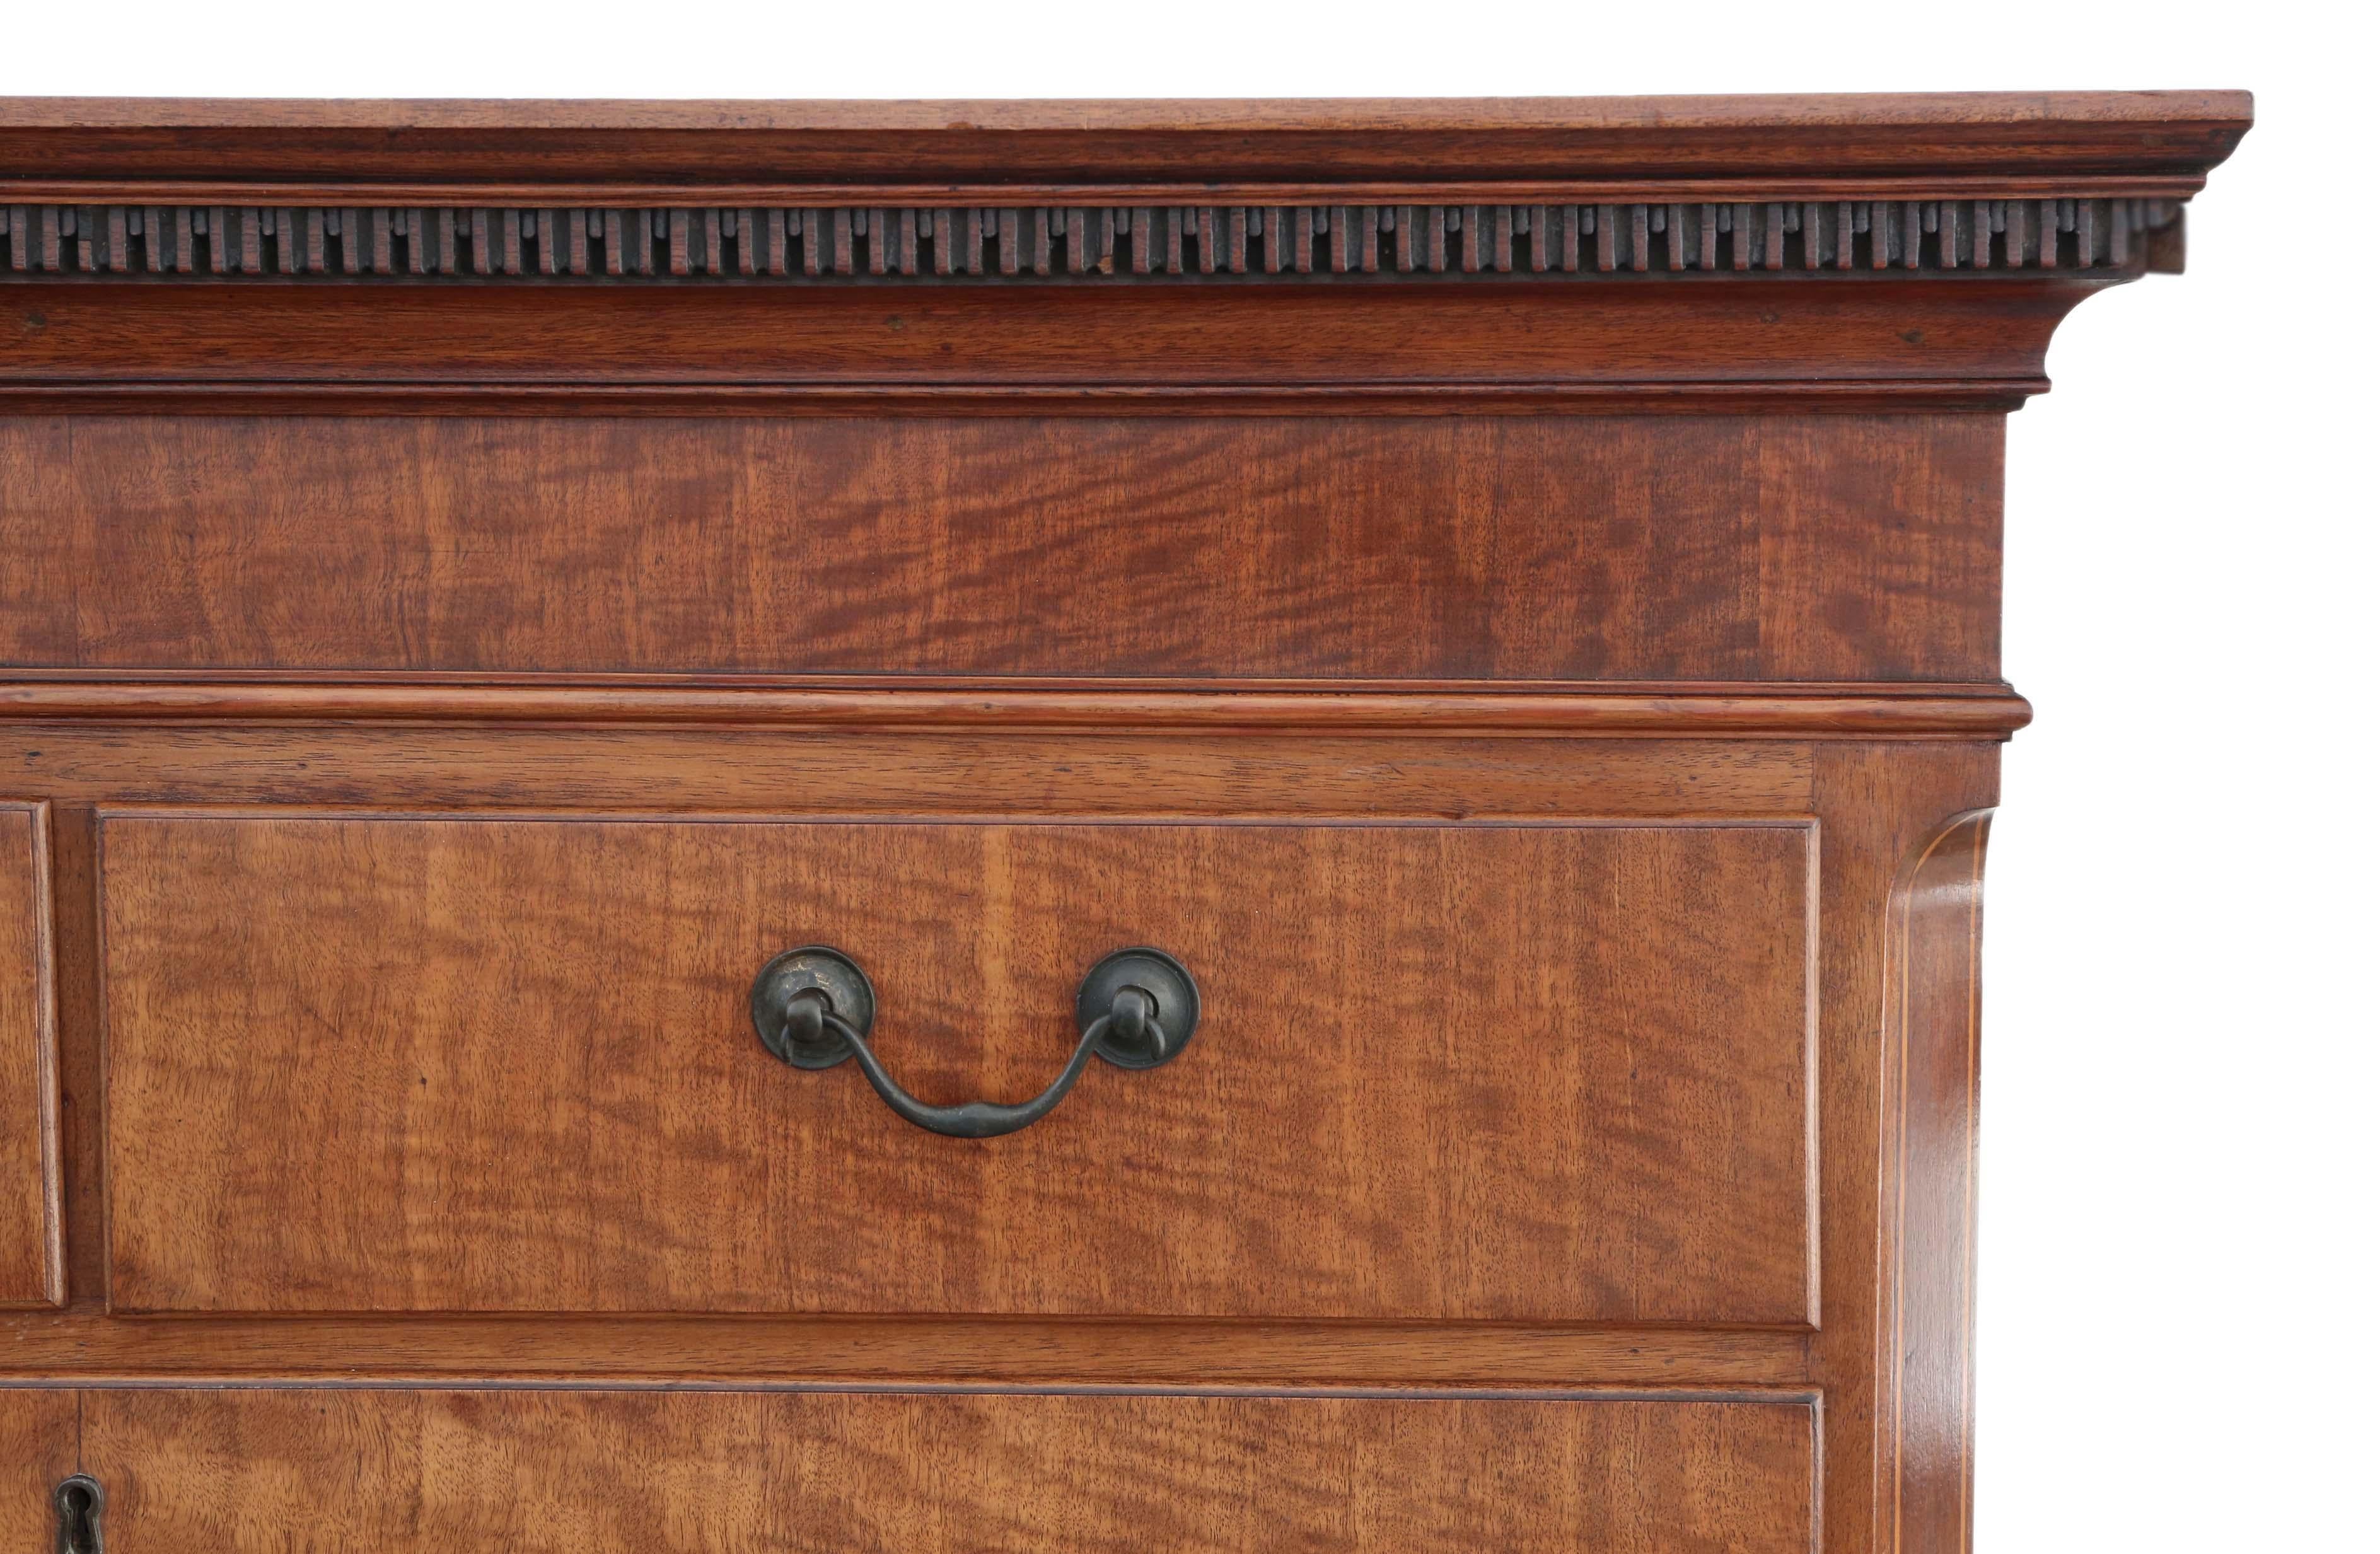 Antique 19th Century inlaid mahogany tallboy chest on chest of drawers.
This is a lovely chest, that has been restored historically to a good standard. Attractive fiddle-back veneers, with a nice light colour. Drawers slide freely.

Solid strong